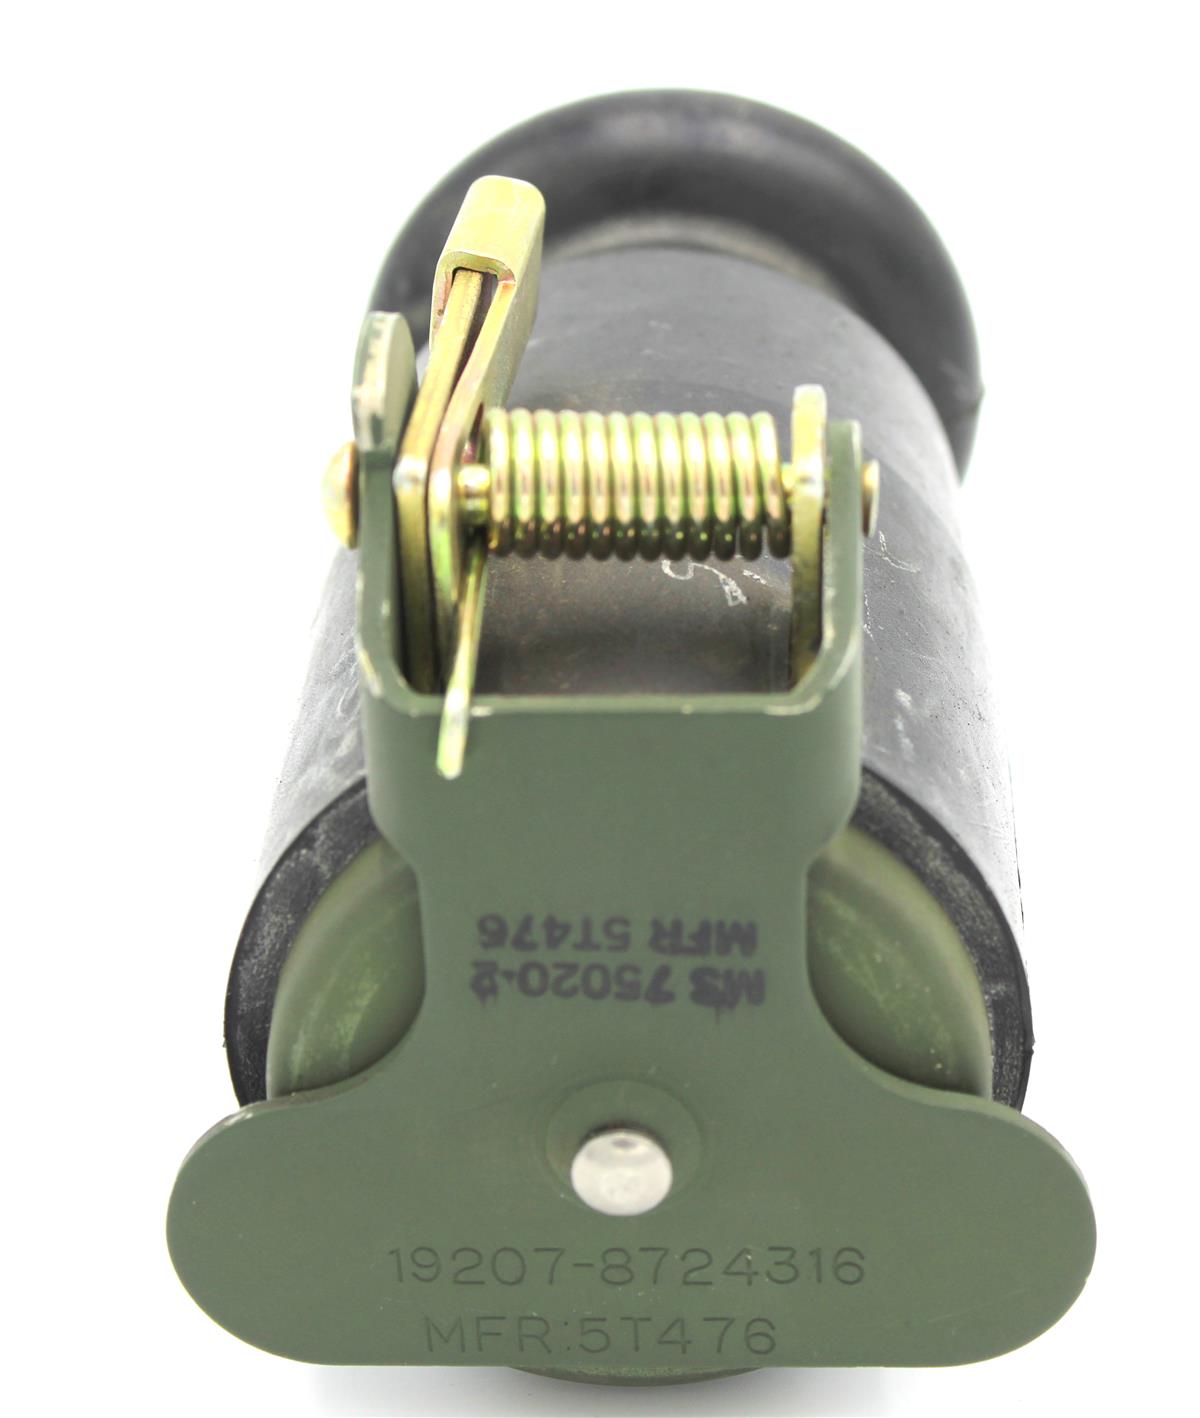 TR-342 | TR-342 Trailer Wiring Connector Plug (Female) Military Common Application (8).JPG